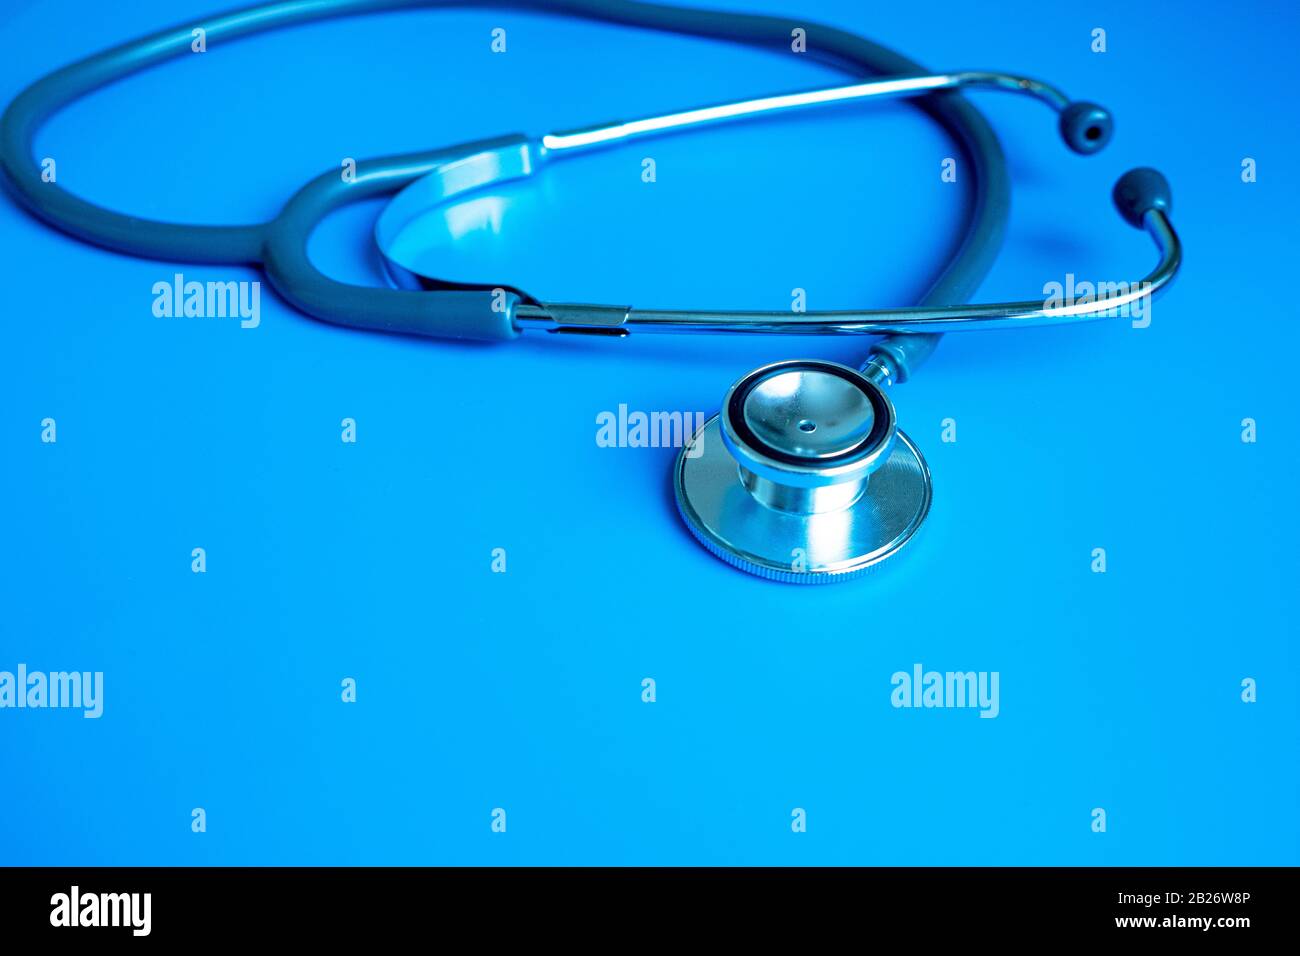 Coronavirus concept. Medical stethoscope on a blue background, copy space Stock Photo